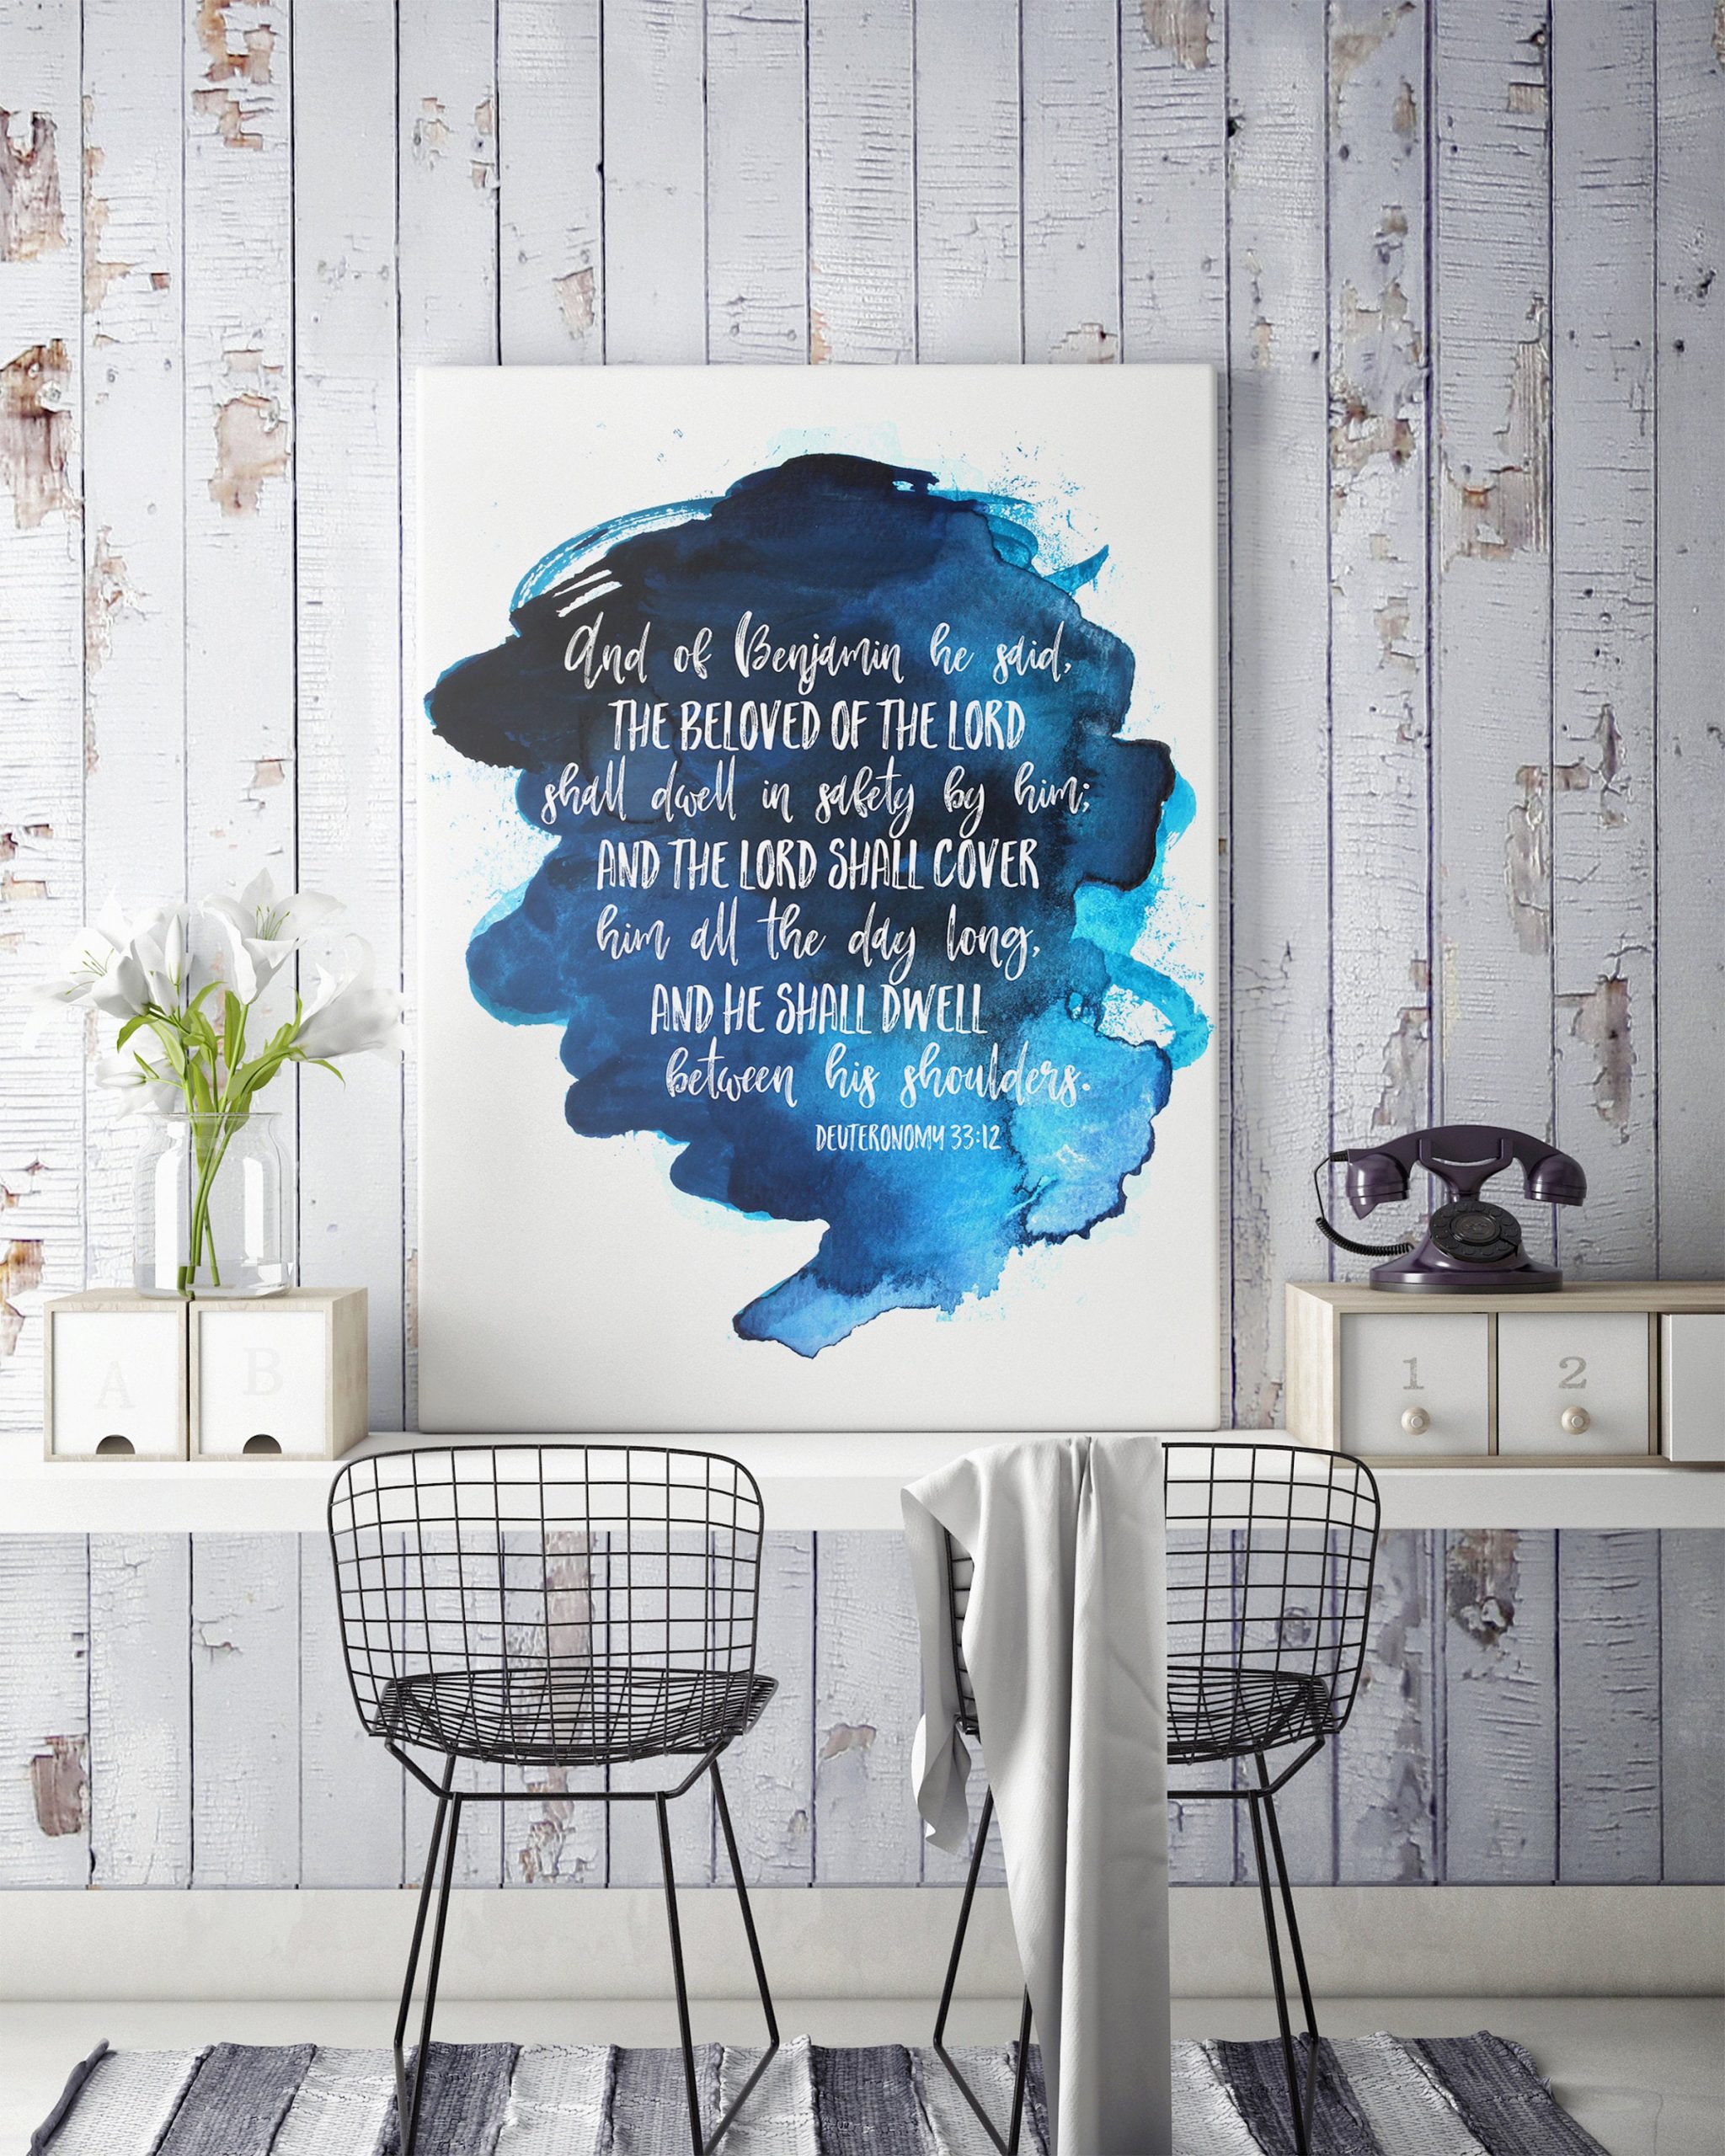 Deuteronomy 33:12 The Beloved of the Lord Shall Dwell In Safety, Printable Bible Verse Wall Art